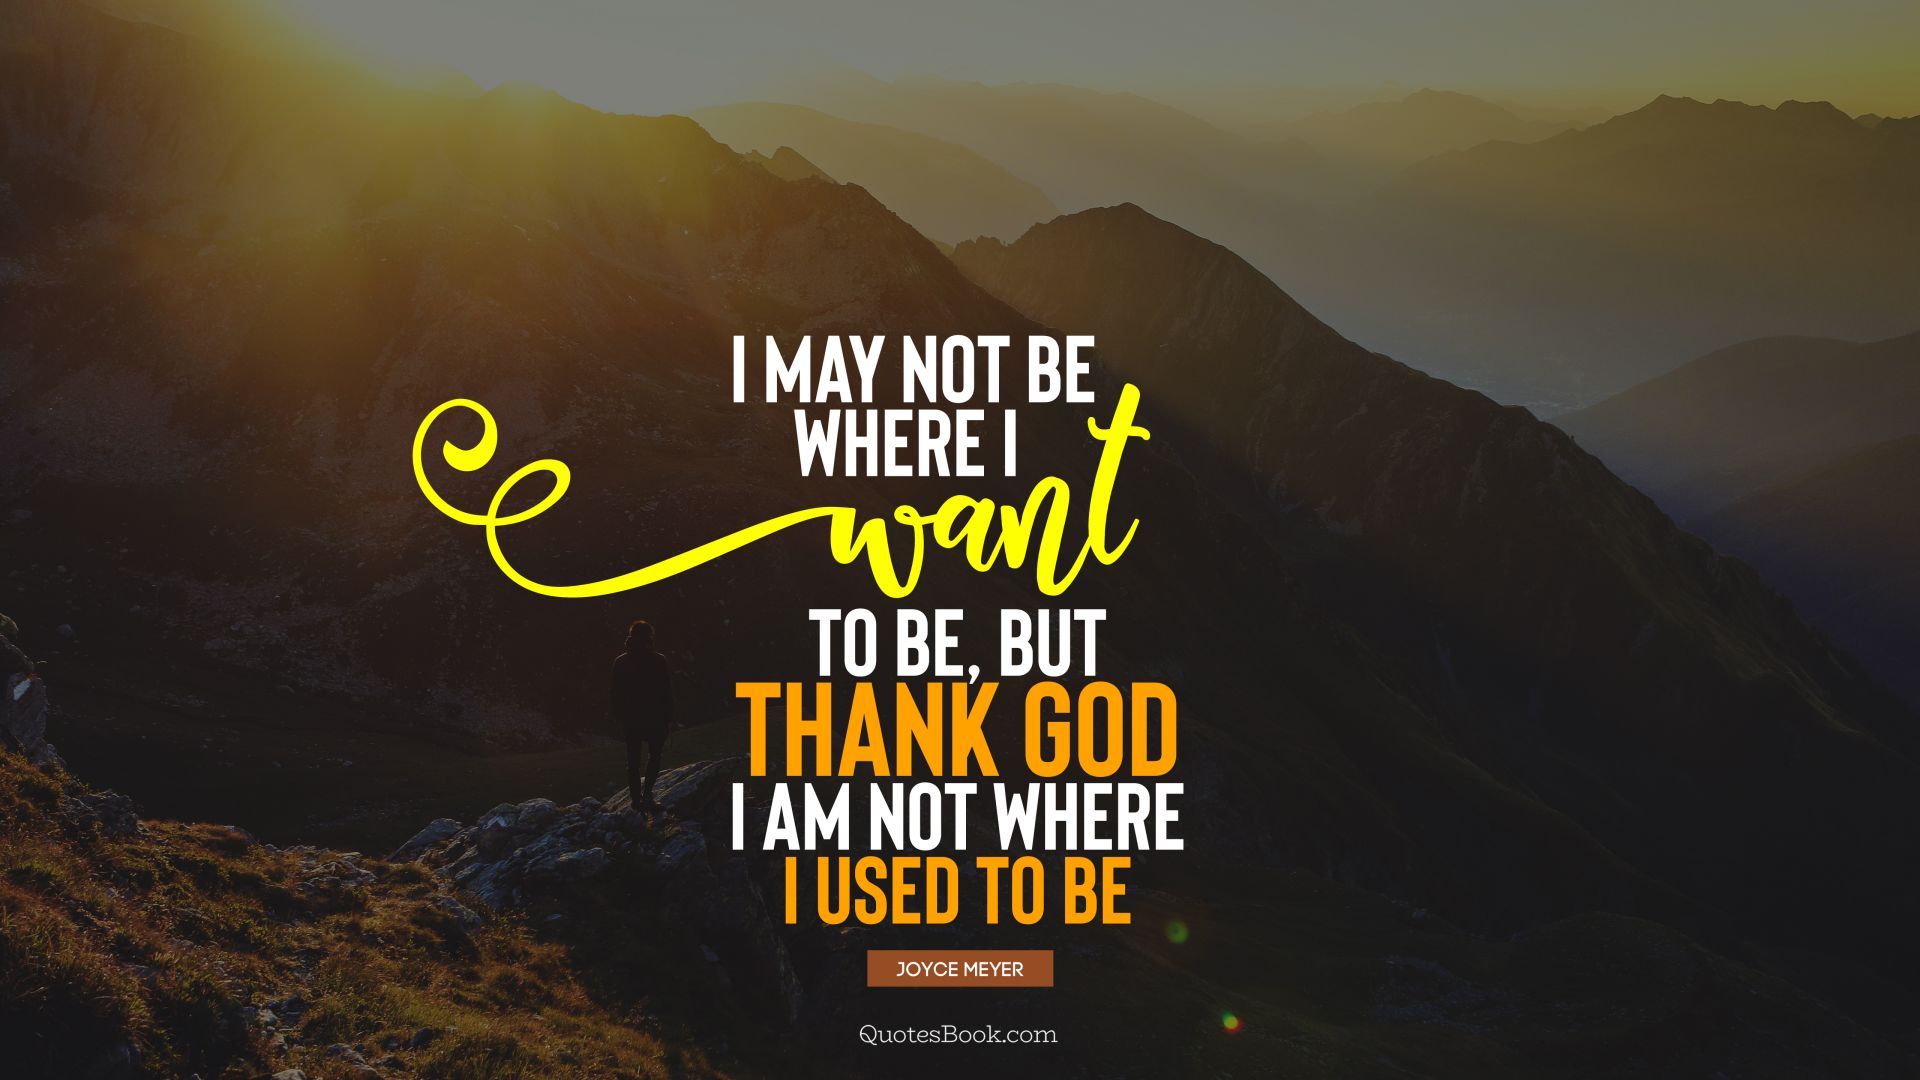 I may not be where I want to be, but thank God I am not where I used to be. - Quote by Joyce Meyer